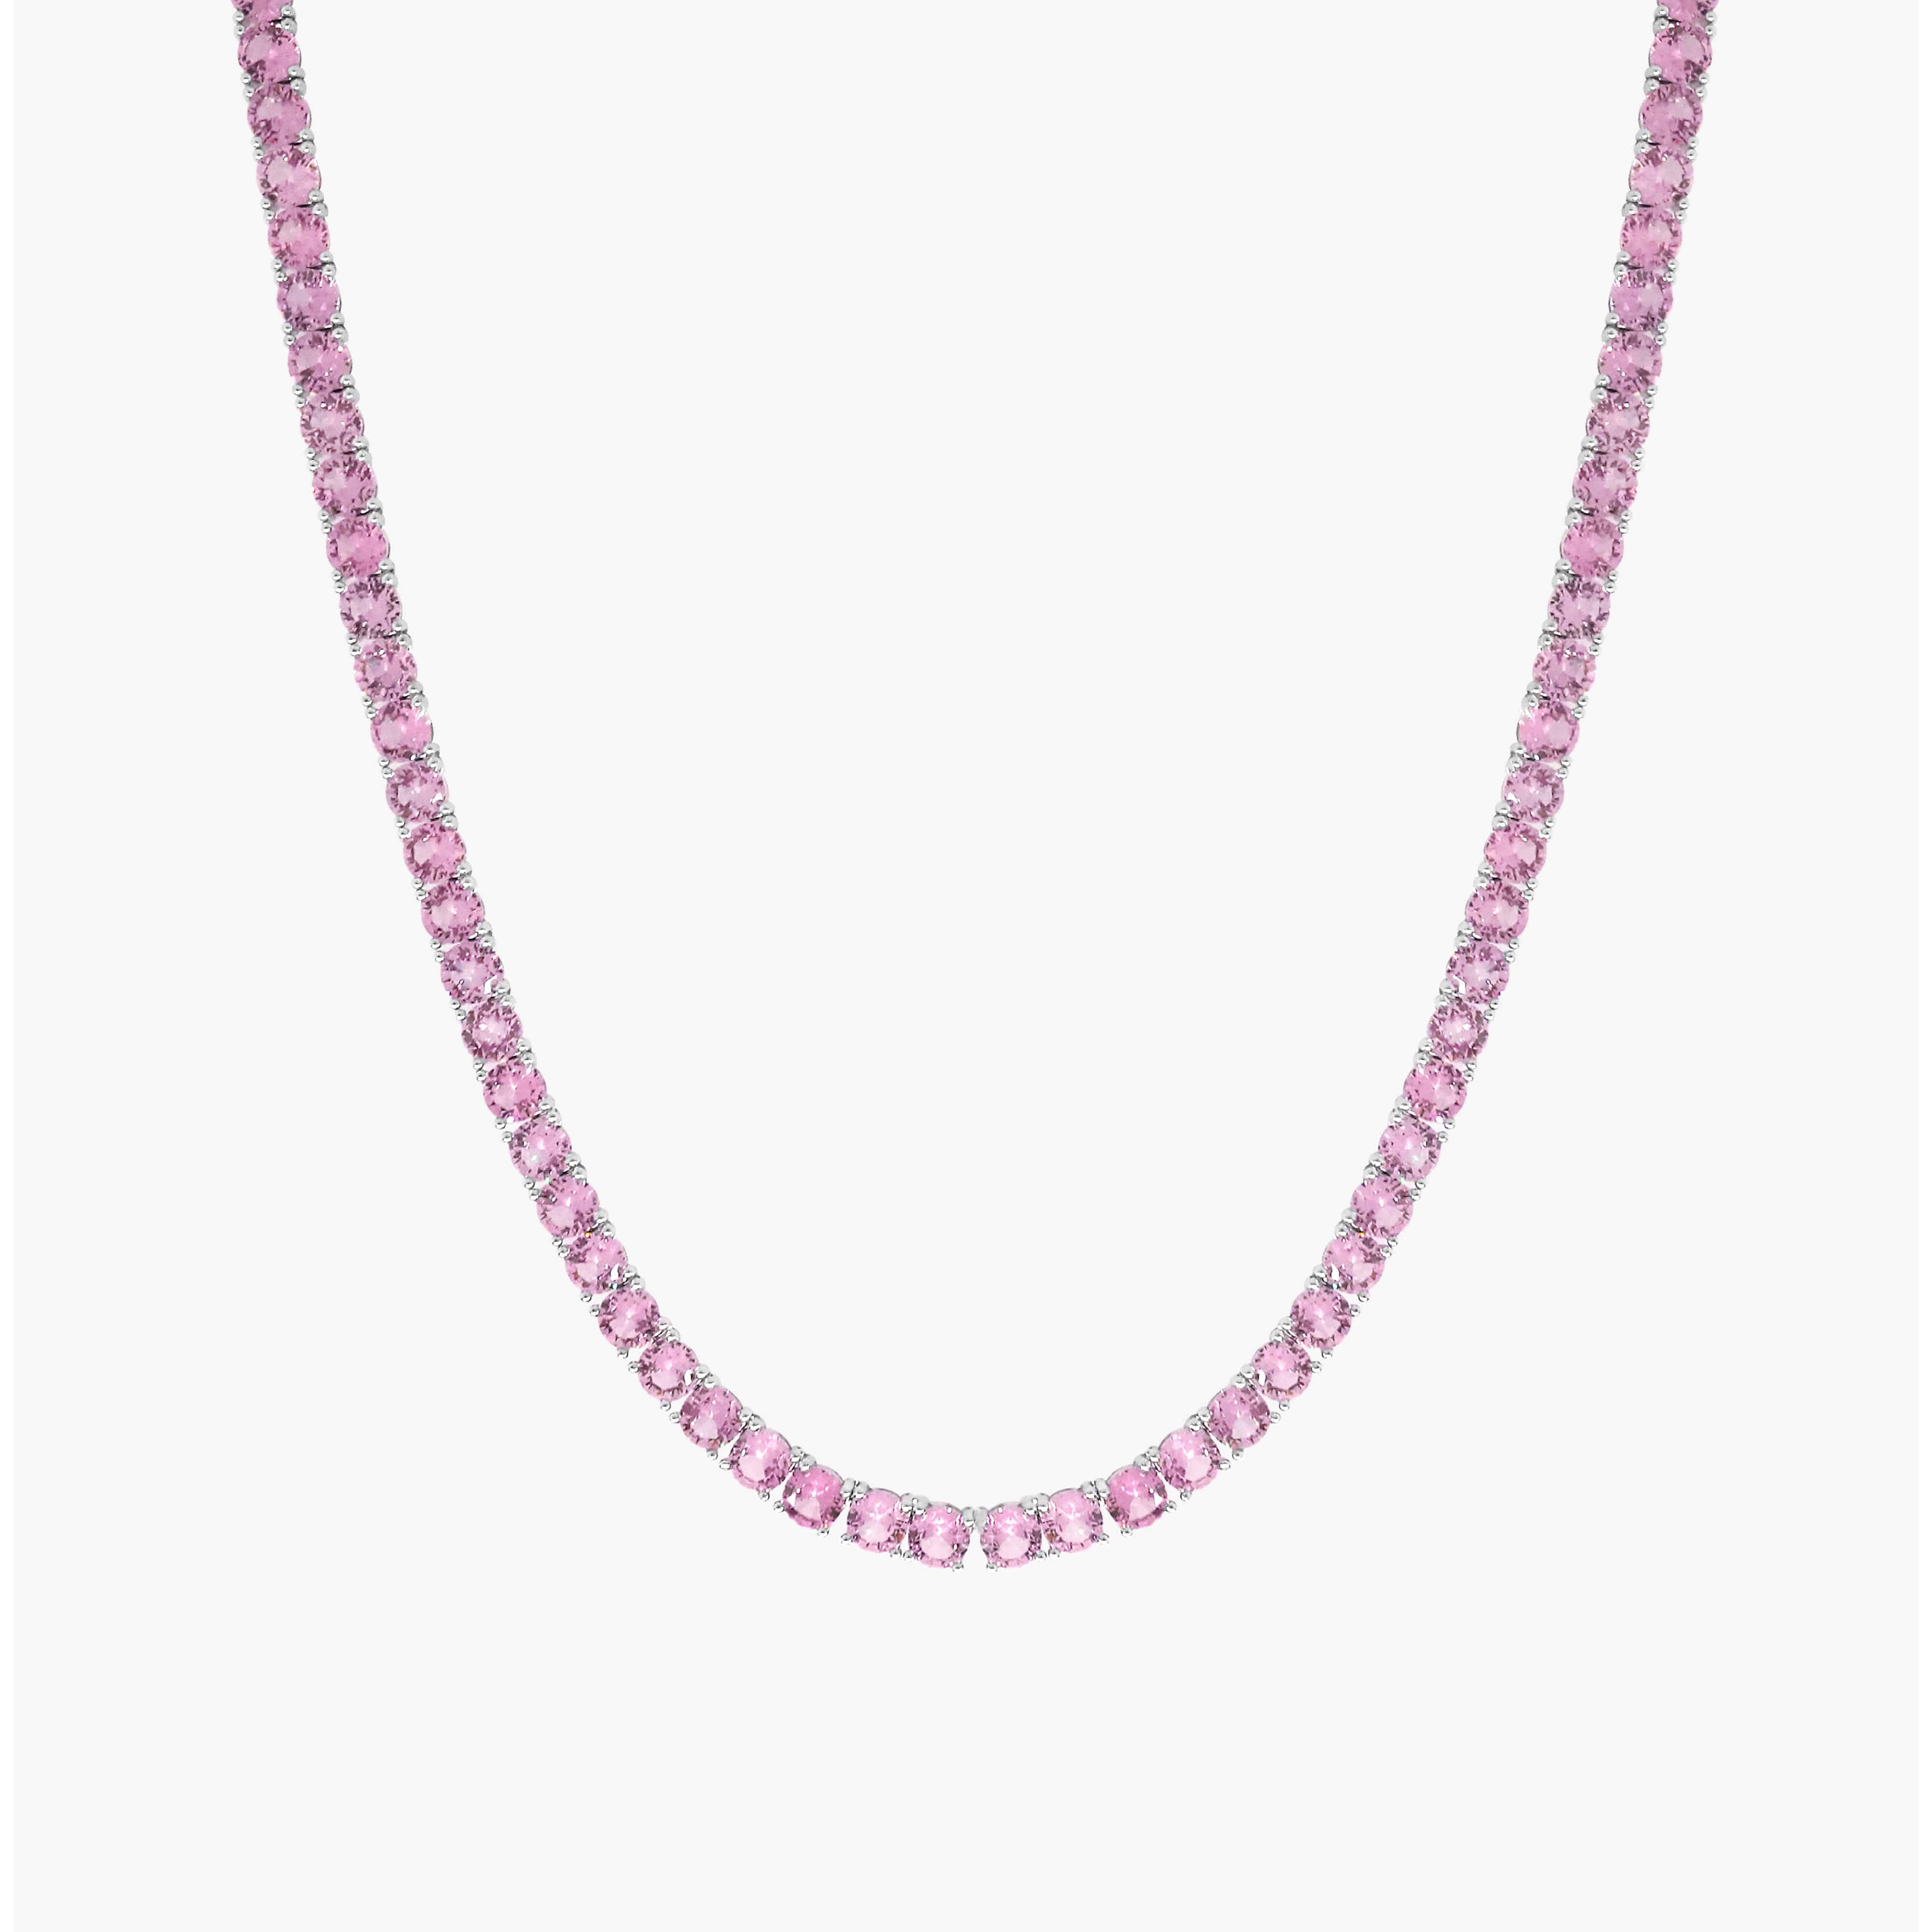 PINK TENNIS NECKLACE